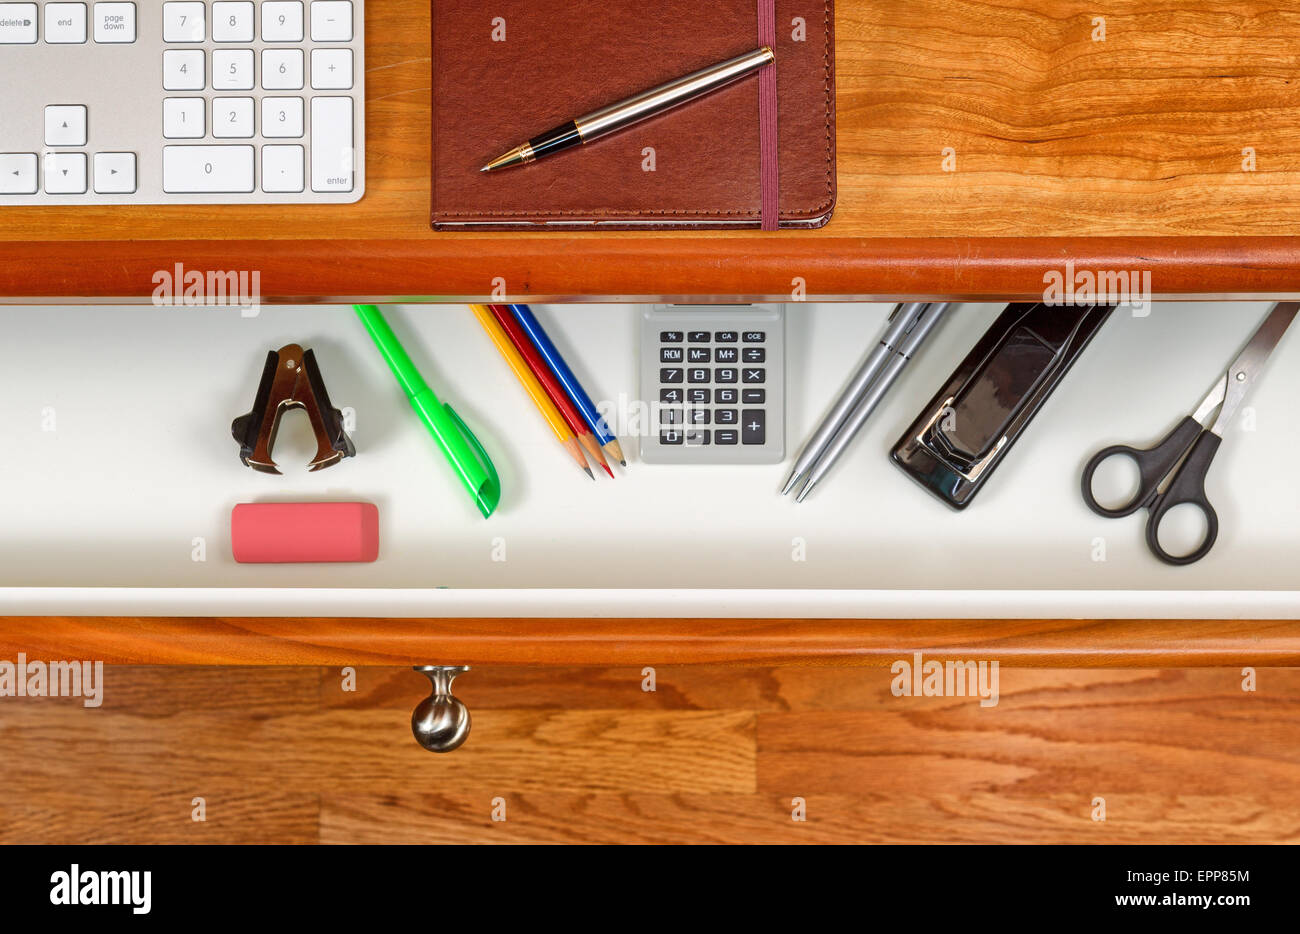 High Angle Shot Of Open Desk Drawer With Work Items Inside Red